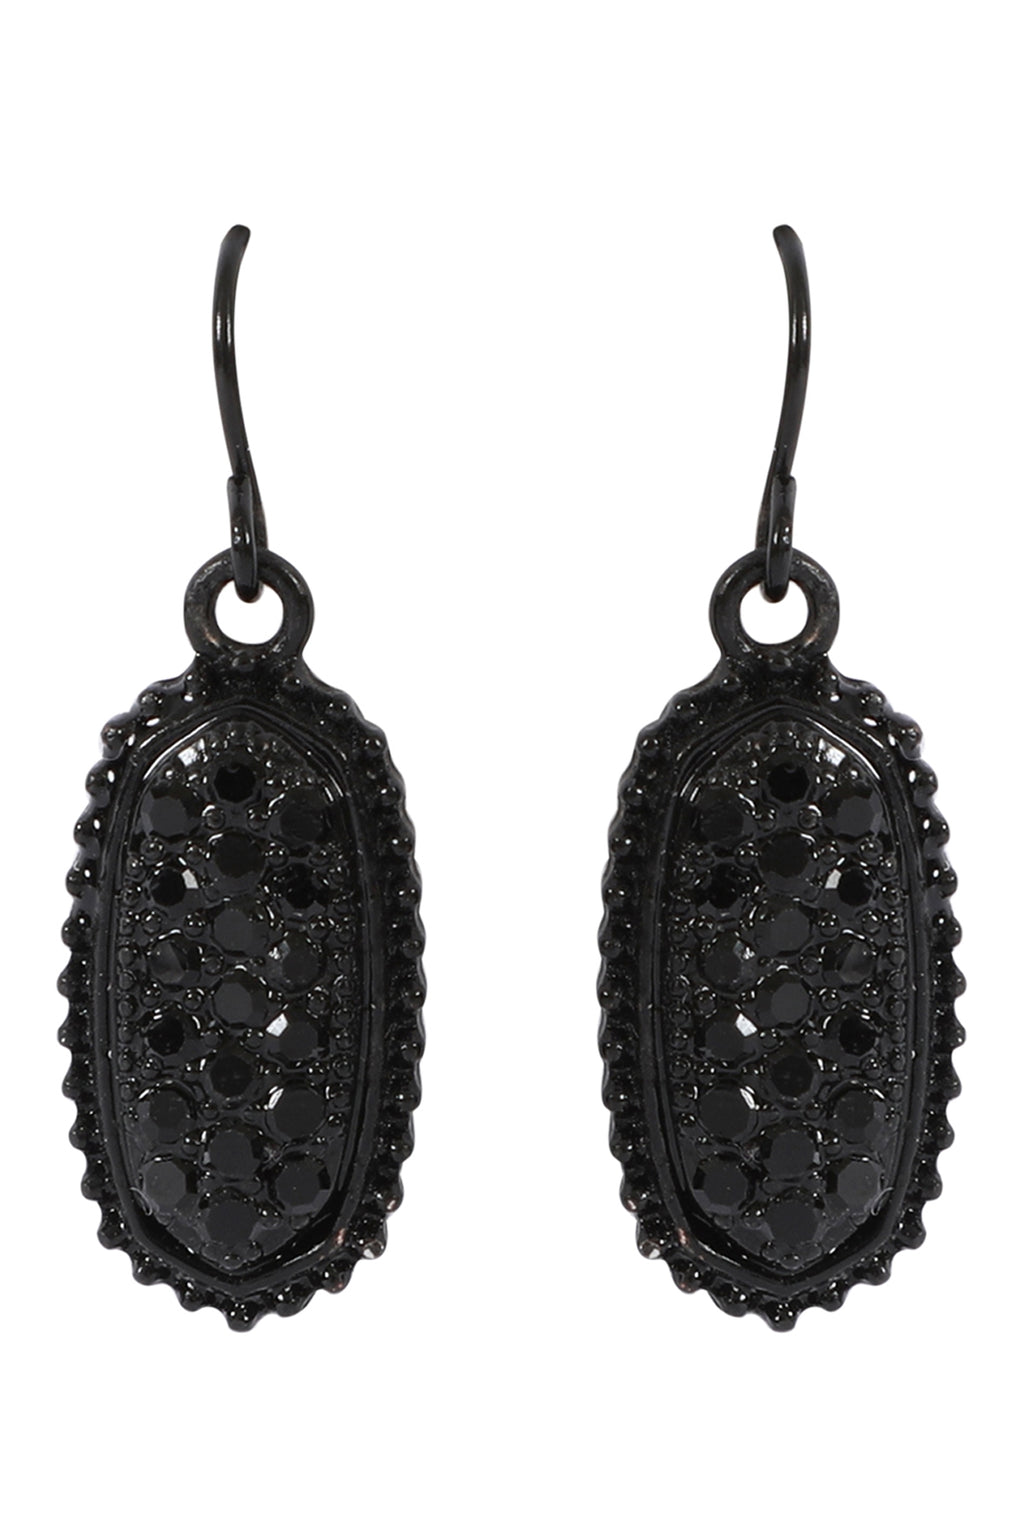 Black Oval Texture Pave Rhinestone Classic Earrings - Pack of 6